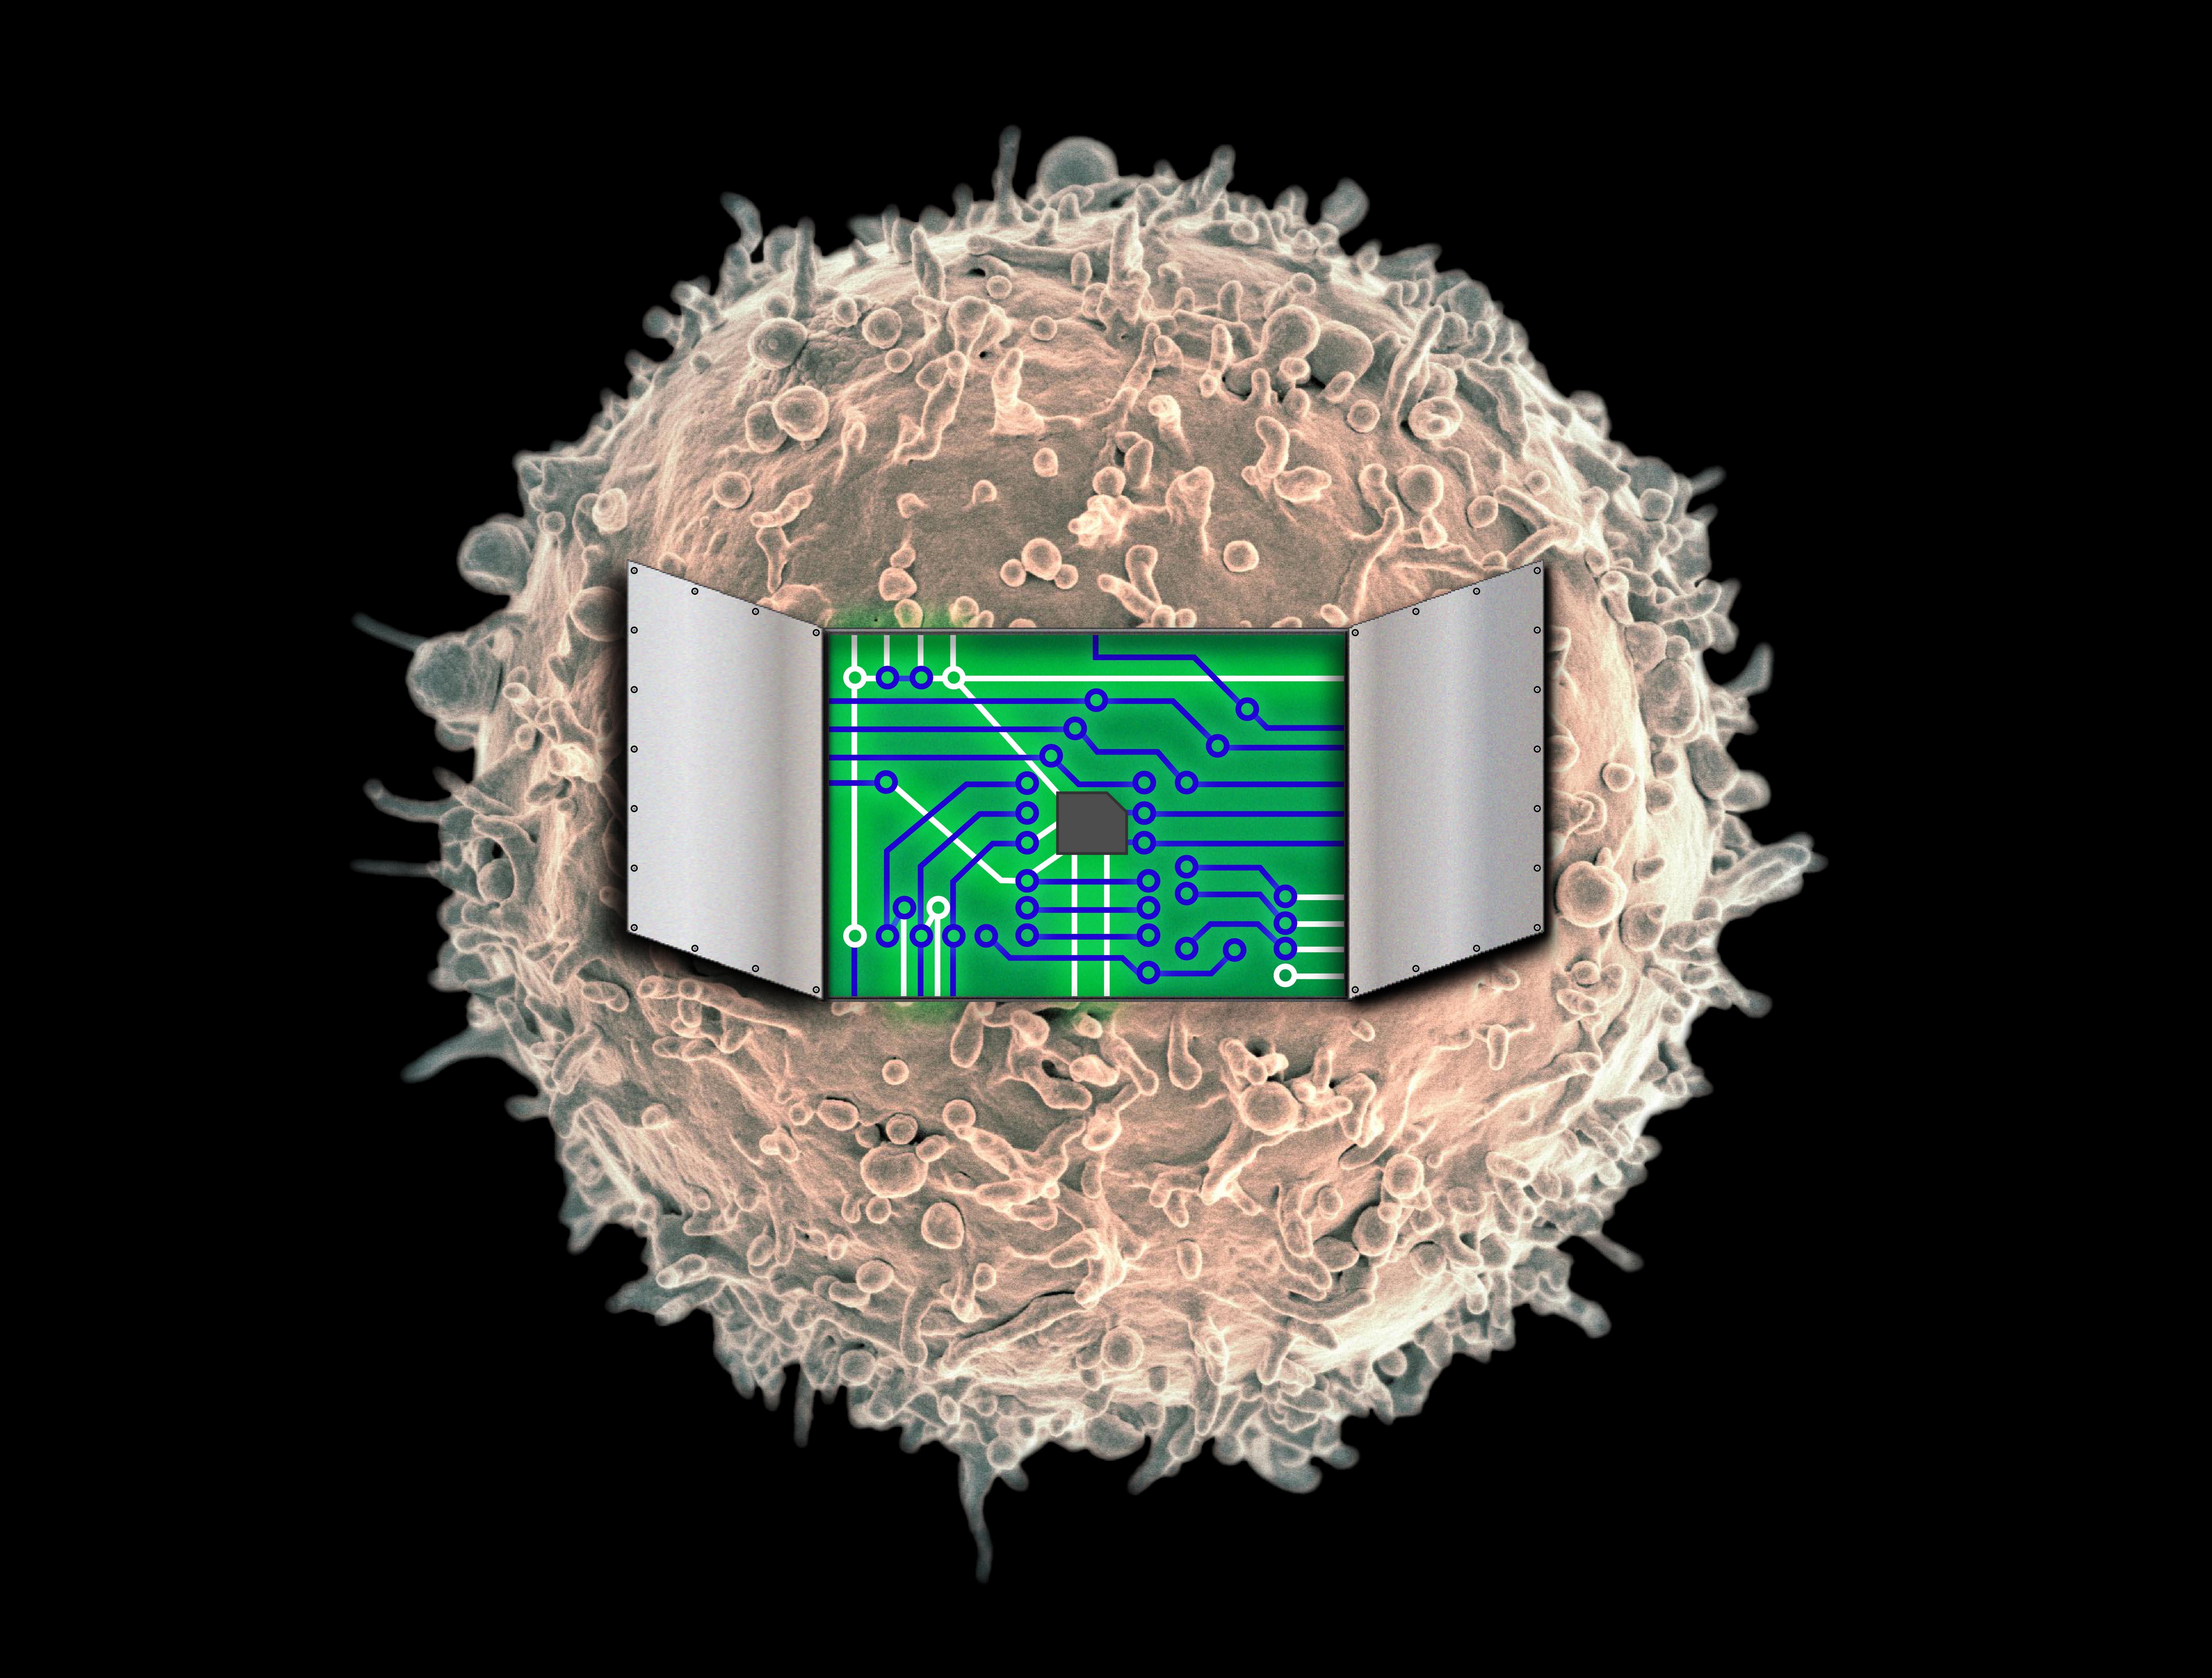 Northwestern University synthetic biologists have developed a technology for engineering customized immune cells to build programmable therapeutics. (Image: Joshua Leonard, Kelly Schwarz / Northwestern University. Cell image: NIAID/NIH / Flickr)